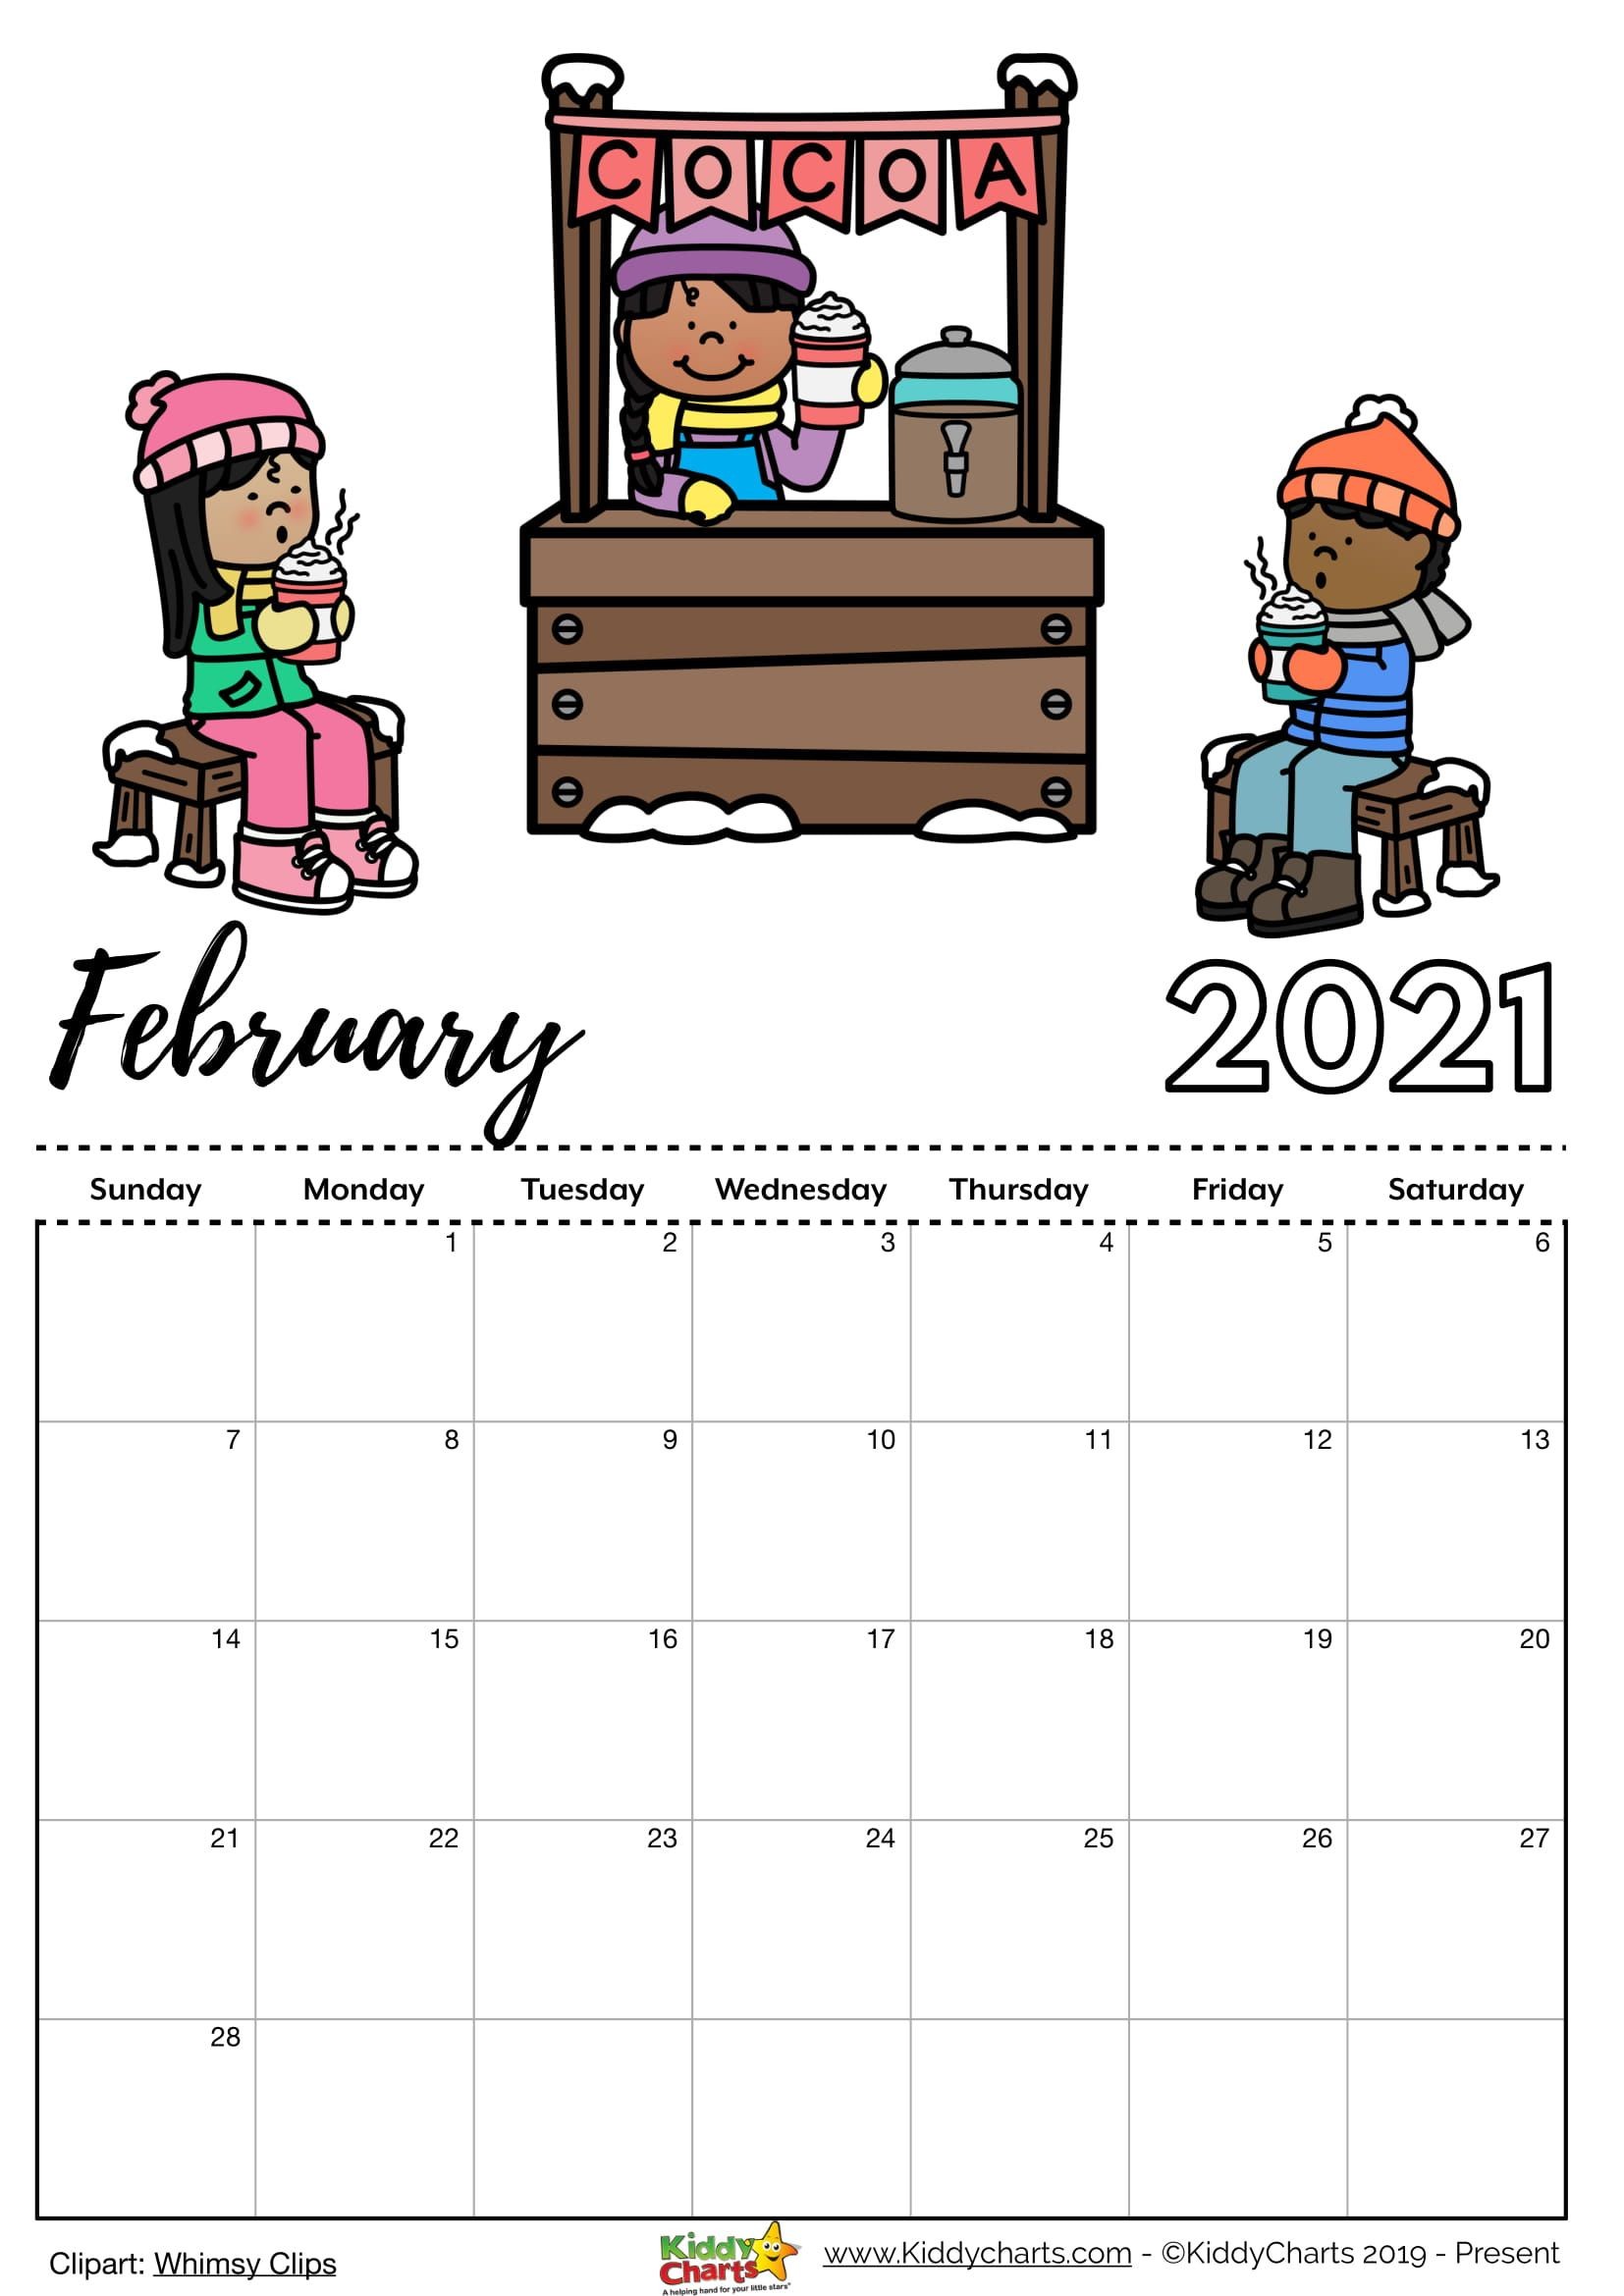 Check our new free printable 2021 calendar in 2020